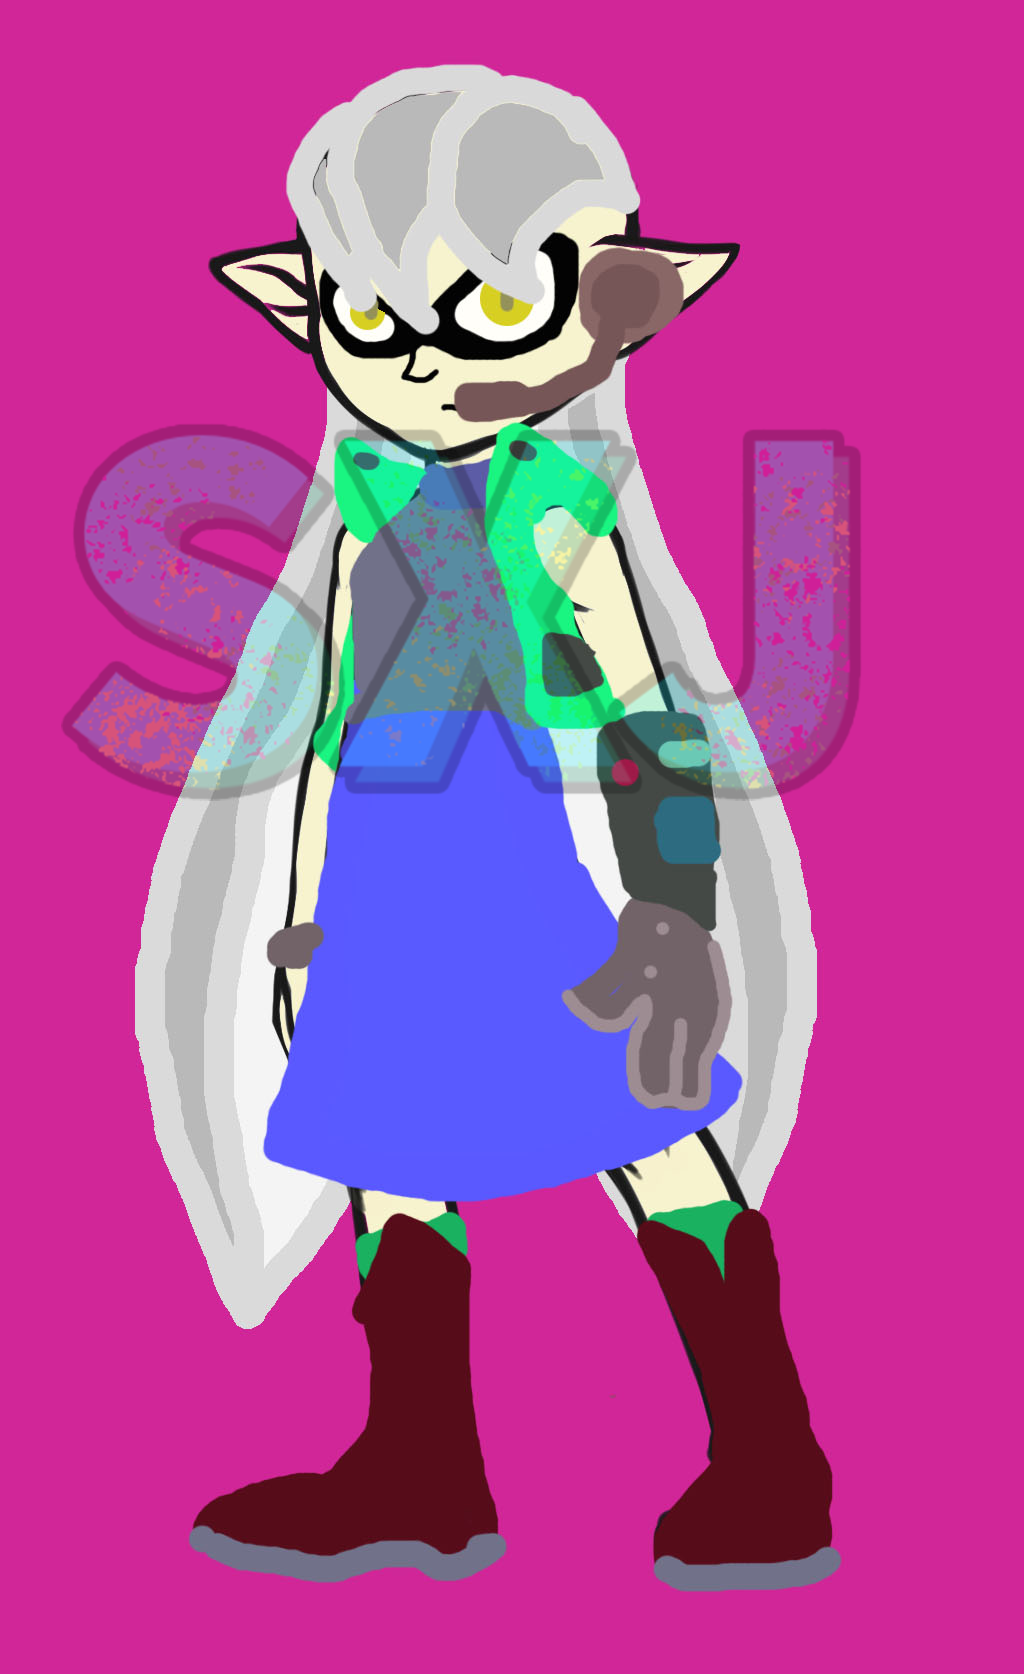 Rough Inkling OC (Not meant to be HQ)